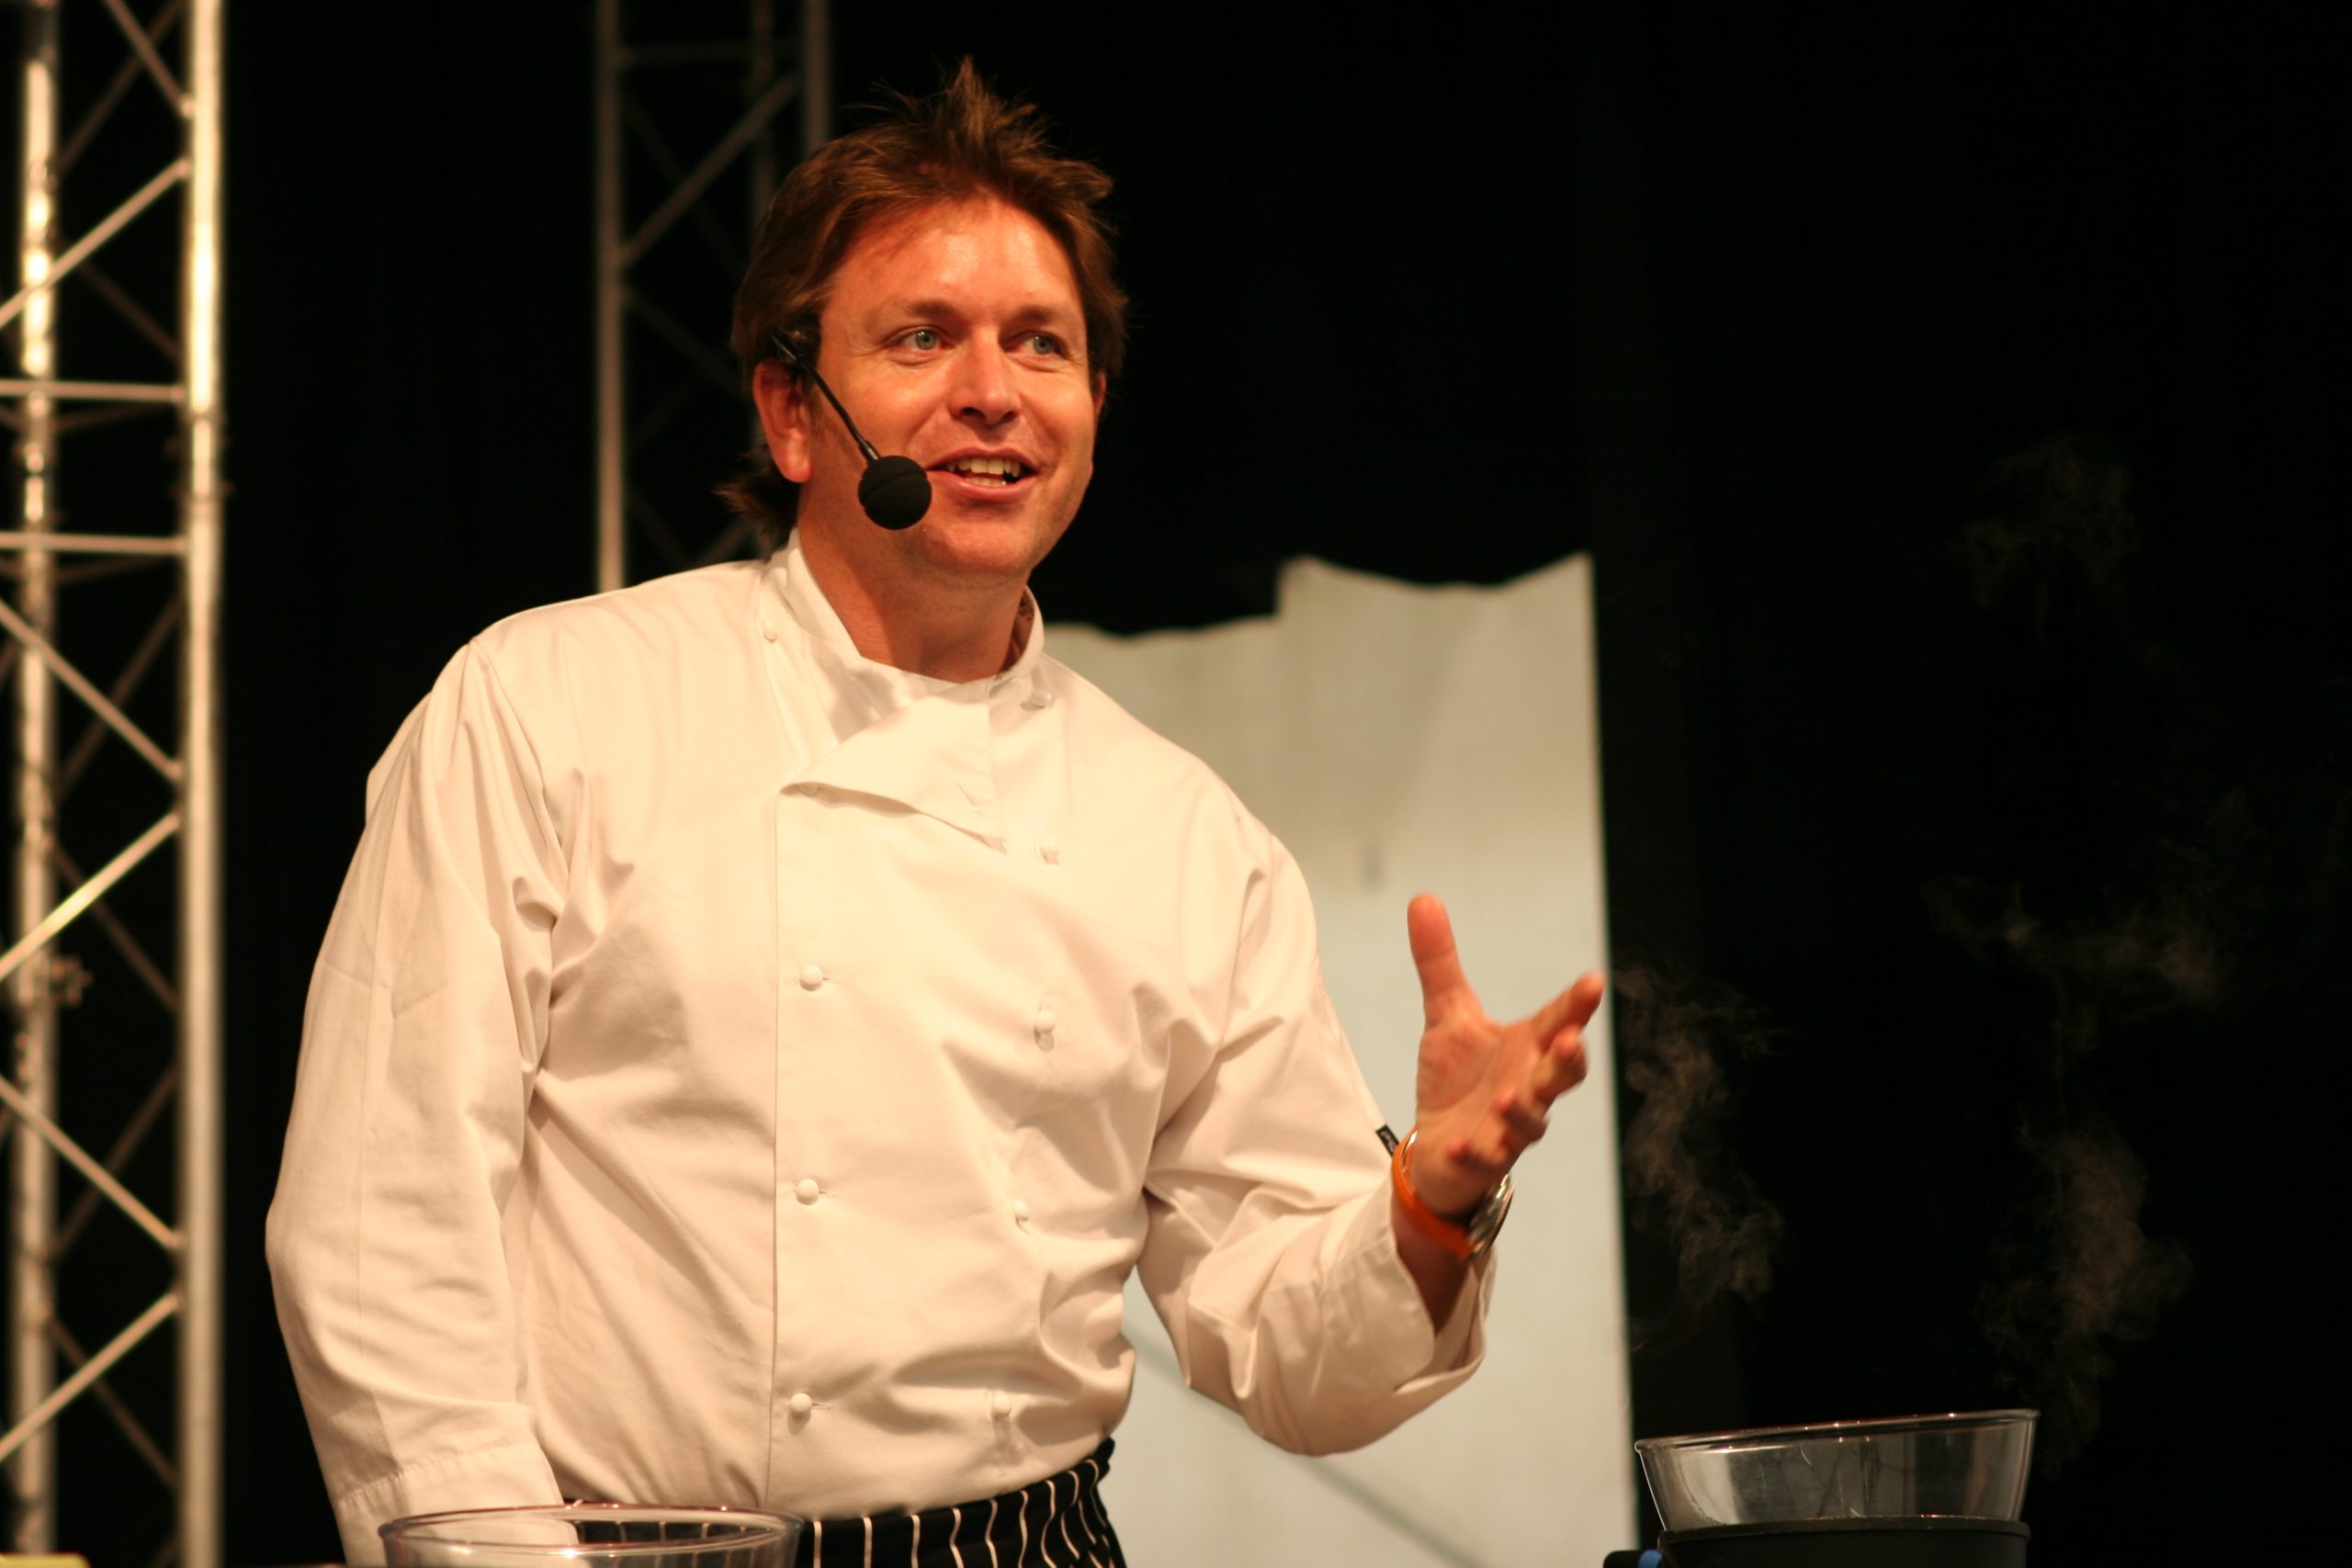 The celebrity chef James Martin is standing in front of a black and white background. He is wearing a headset and is holding up one hand.